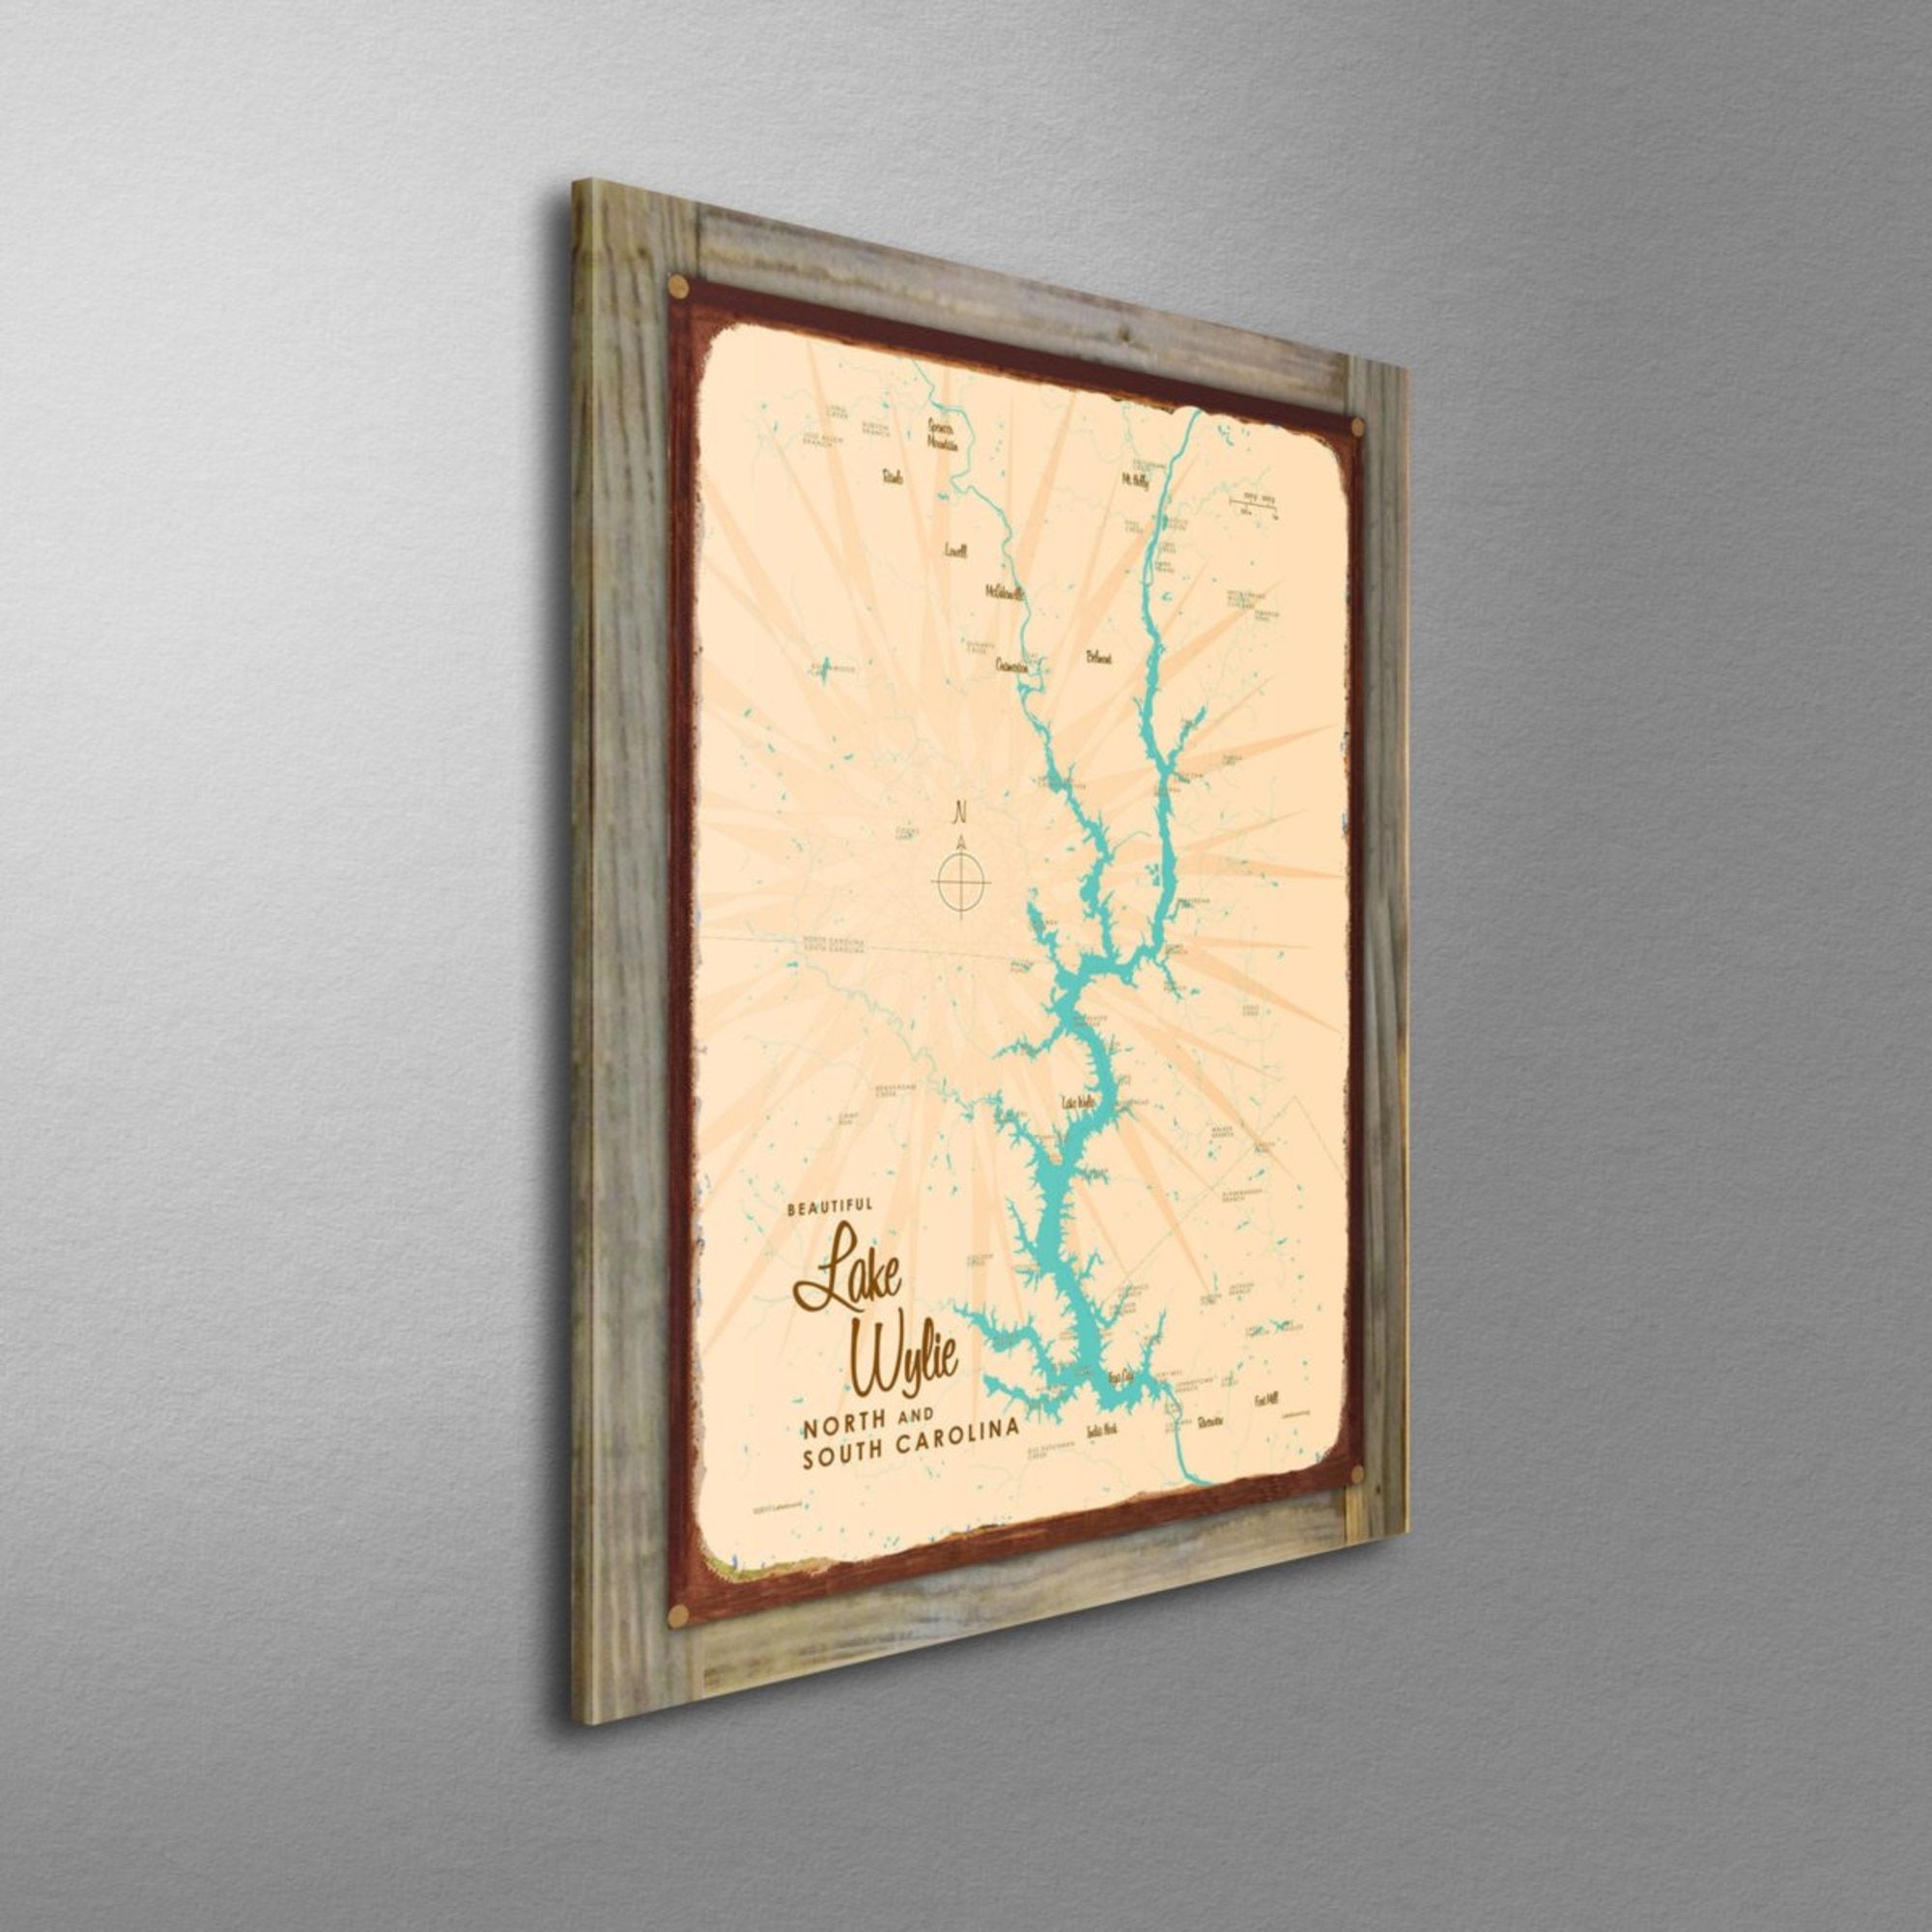 Lake Wylie North and South Carolina, Wood-Mounted Rustic Metal Sign Map Art